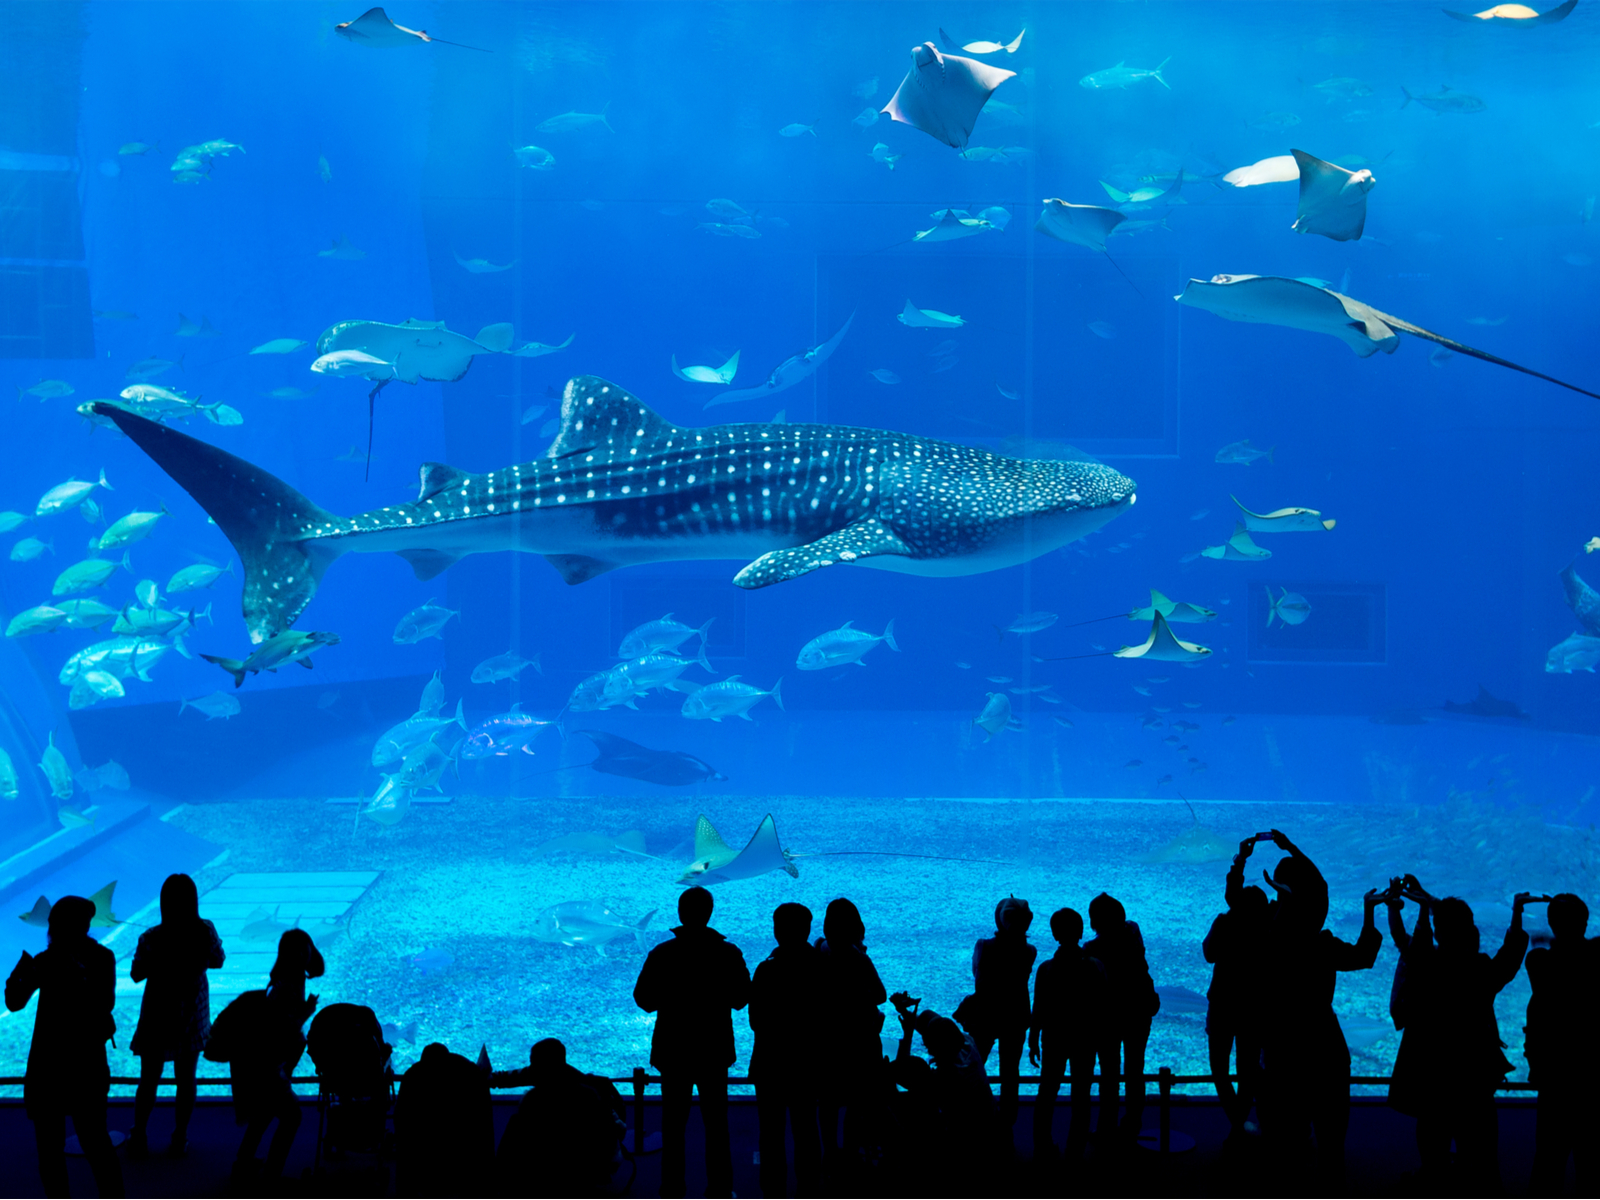 Giant white shark pictured in a gigantic aquarium, one of the best things to do in Atlanta